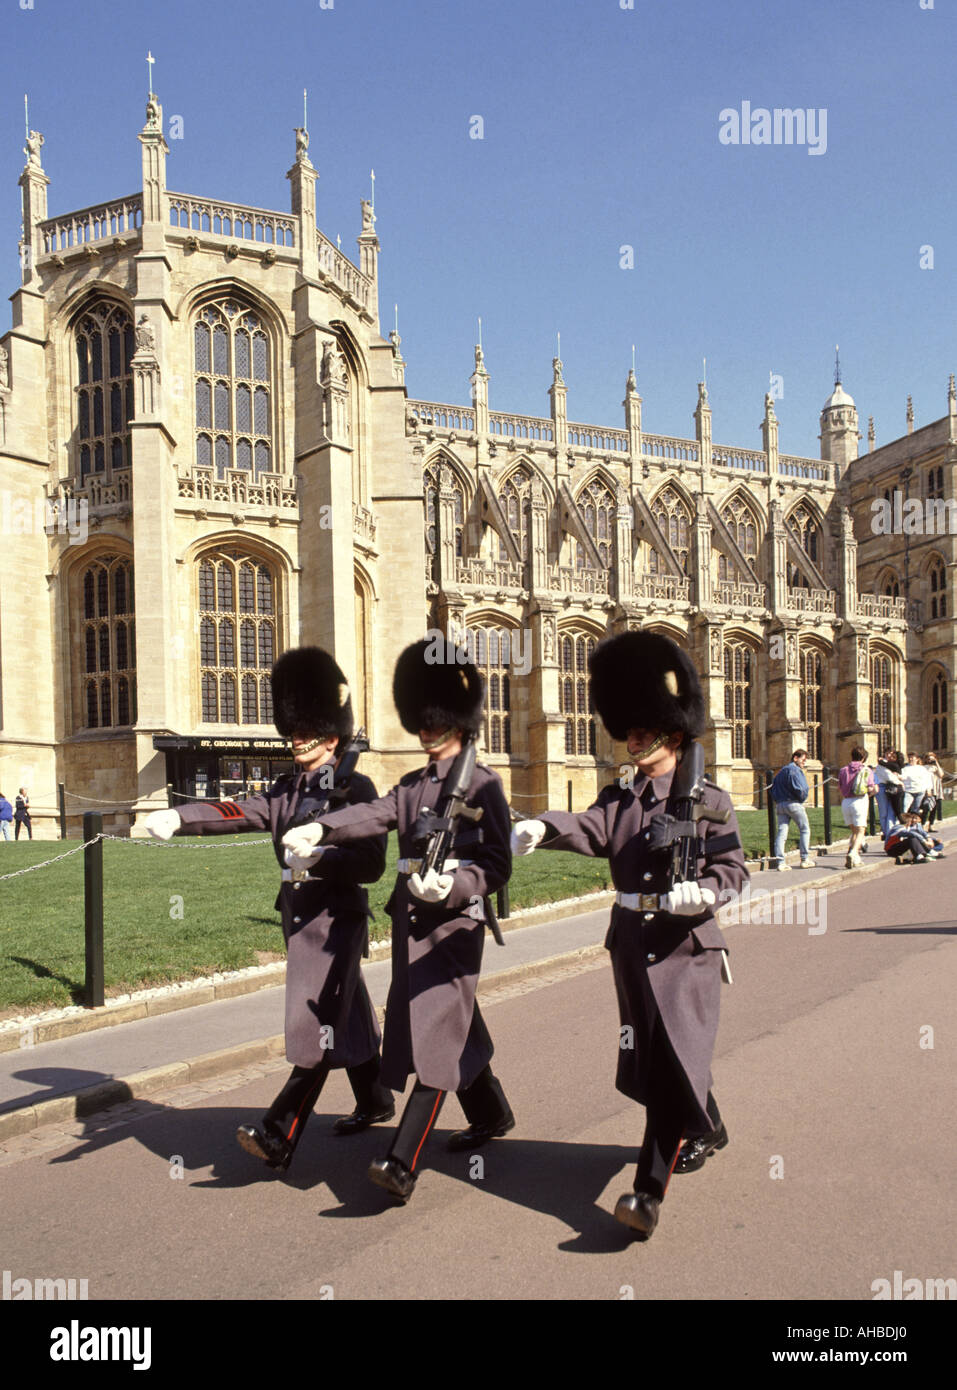 St Georges Chapel Windsor Castle Berkshire England UK British Army Grenadier guardsmen soldiers marching in winter uniform with Bearskin hat & plume Stock Photo